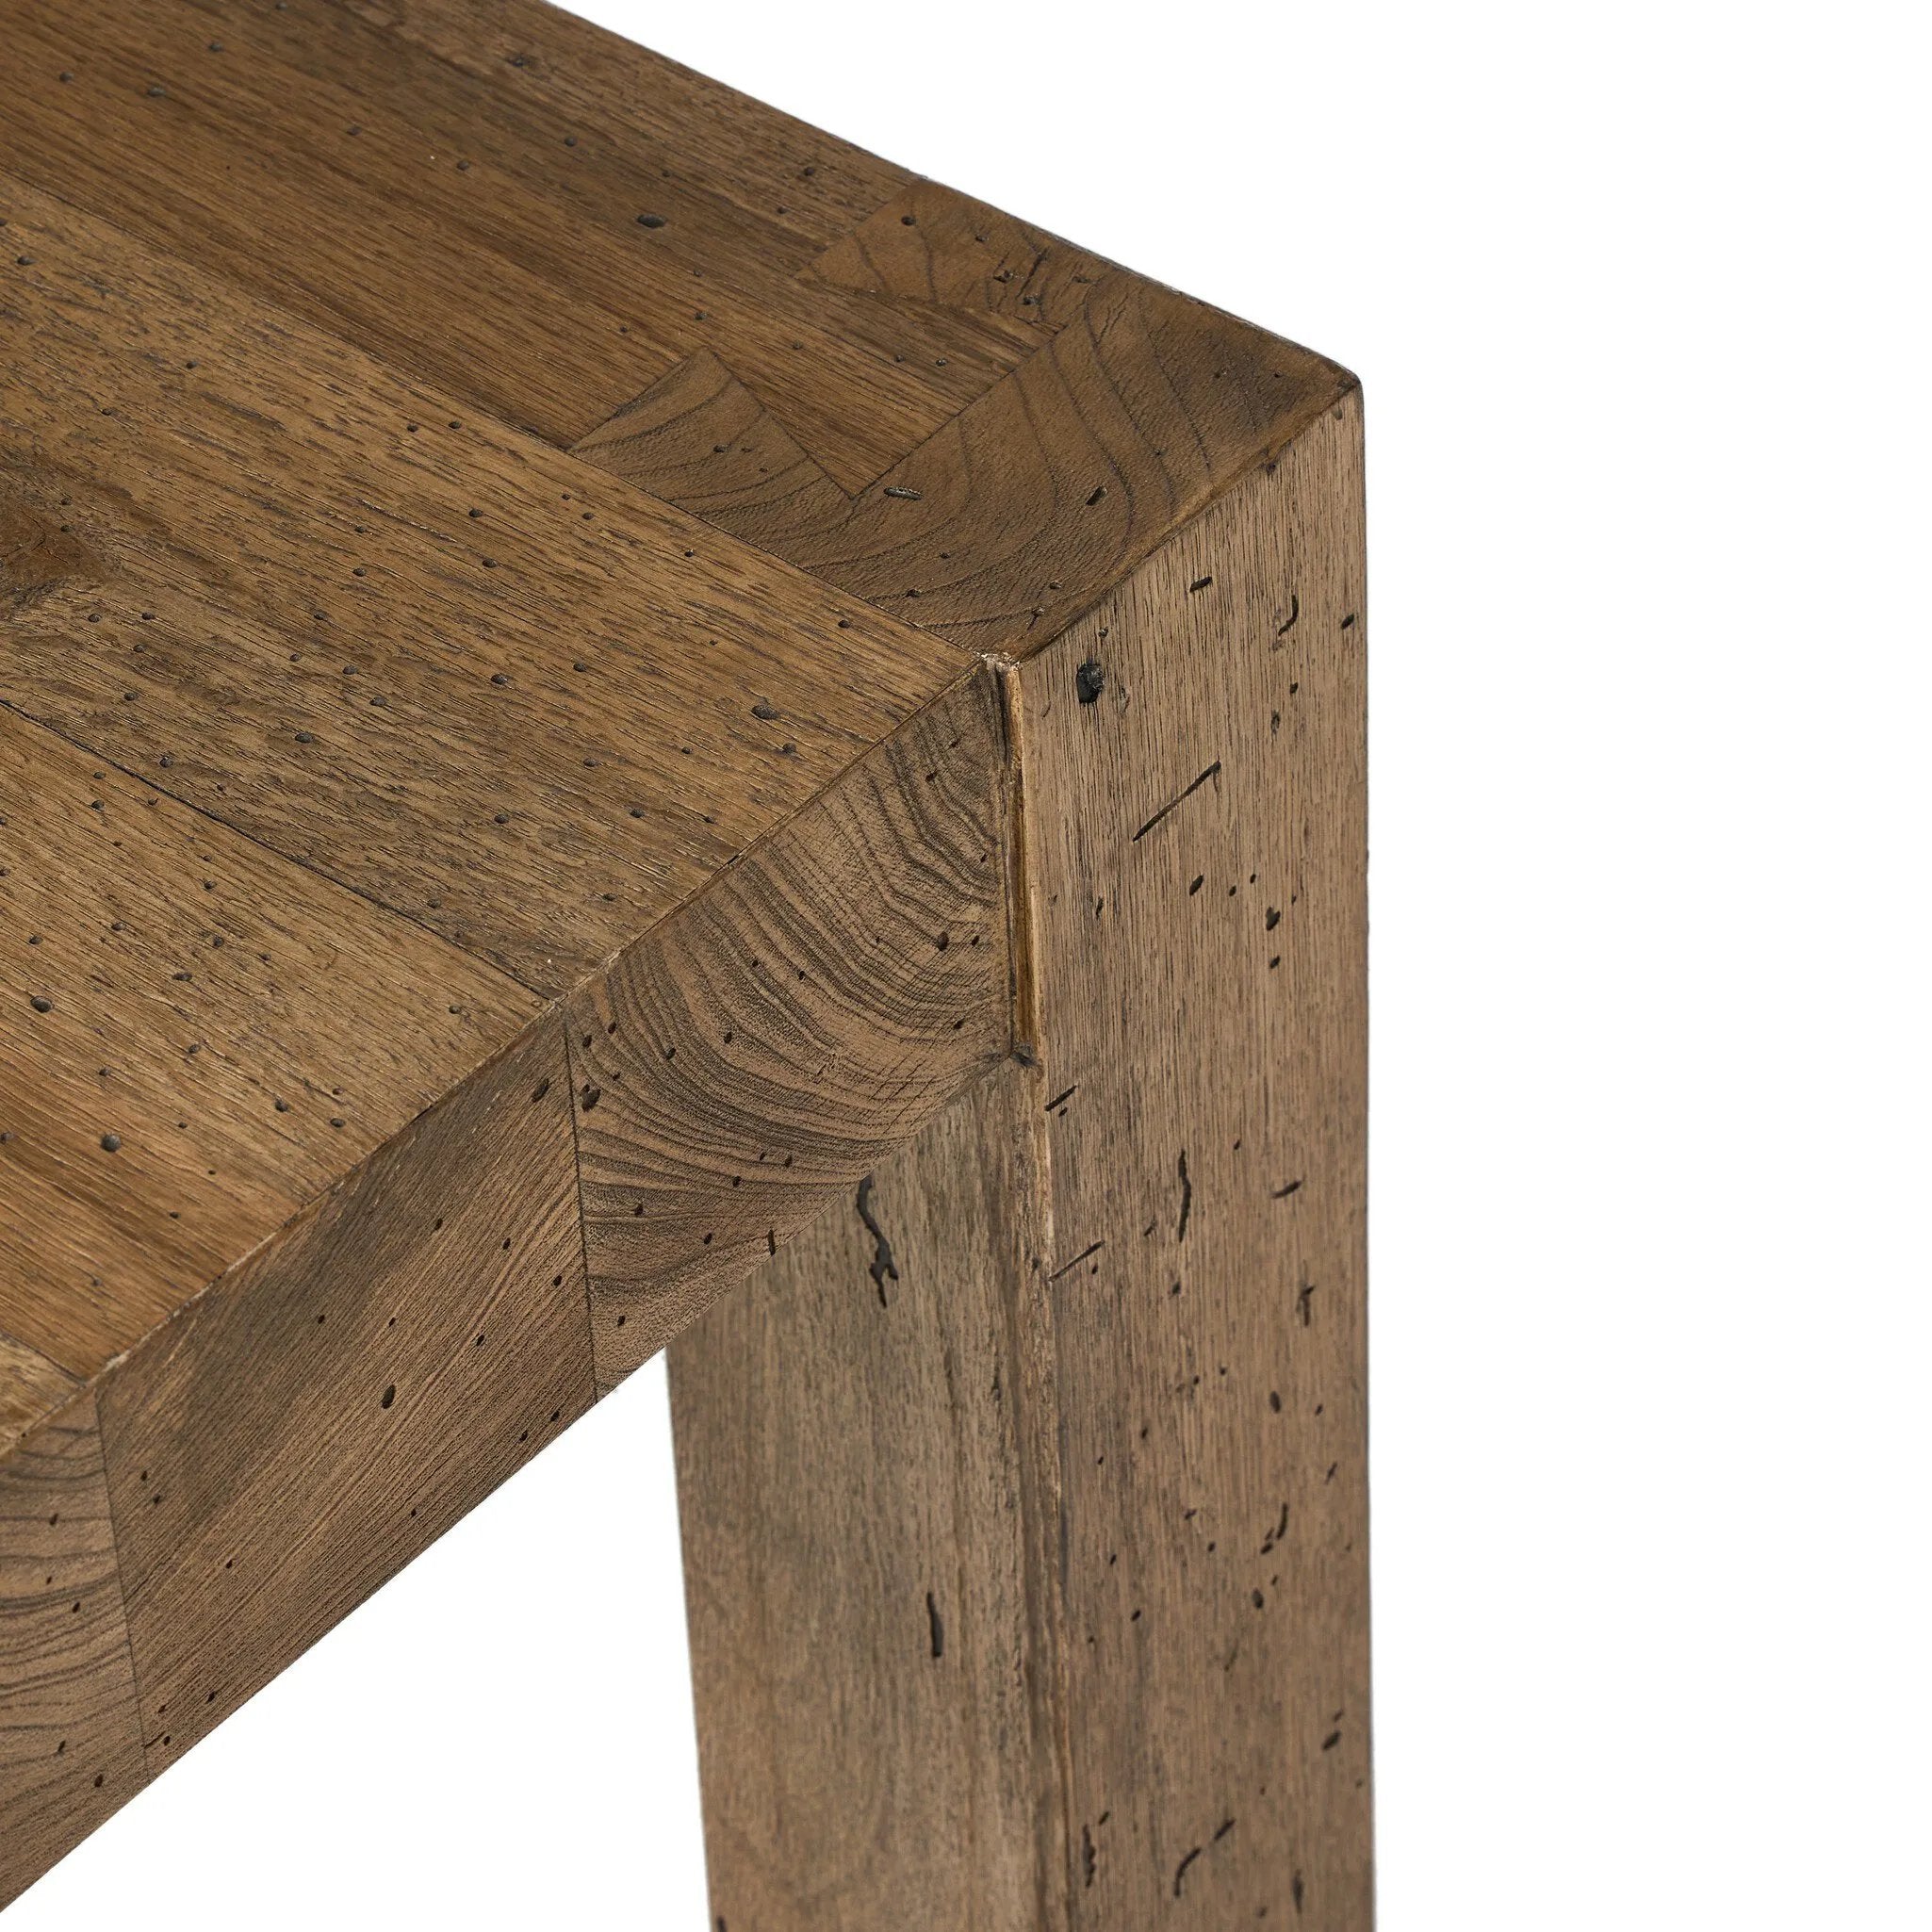 Made from thick-cut oak veneer with a faux rustic finish made to emulate wormwood, this end table features chunky squared legs and dovetail joinery detailing.Collection: Wesso Amethyst Home provides interior design, new home construction design consulting, vintage area rugs, and lighting in the Newport Beach metro area.